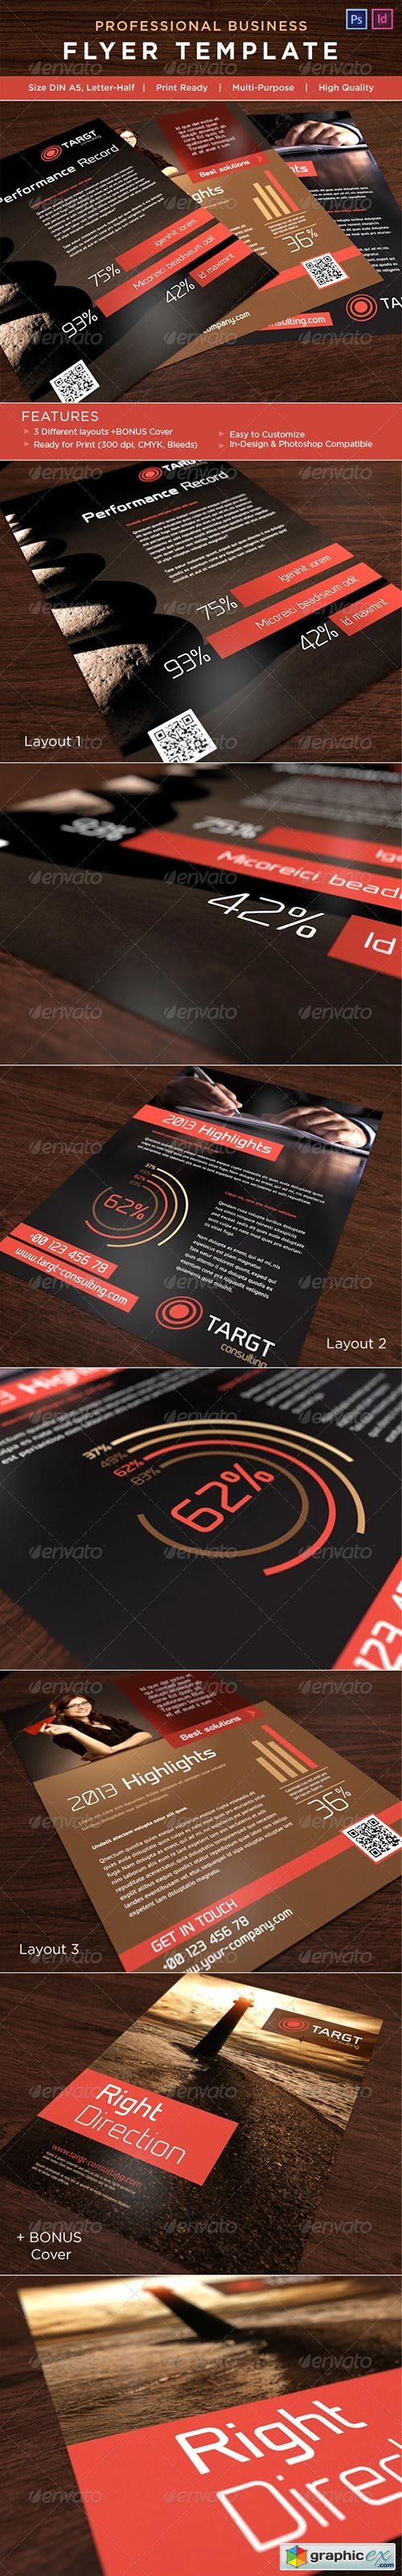 Corporate Flyer / AD Template 3598465